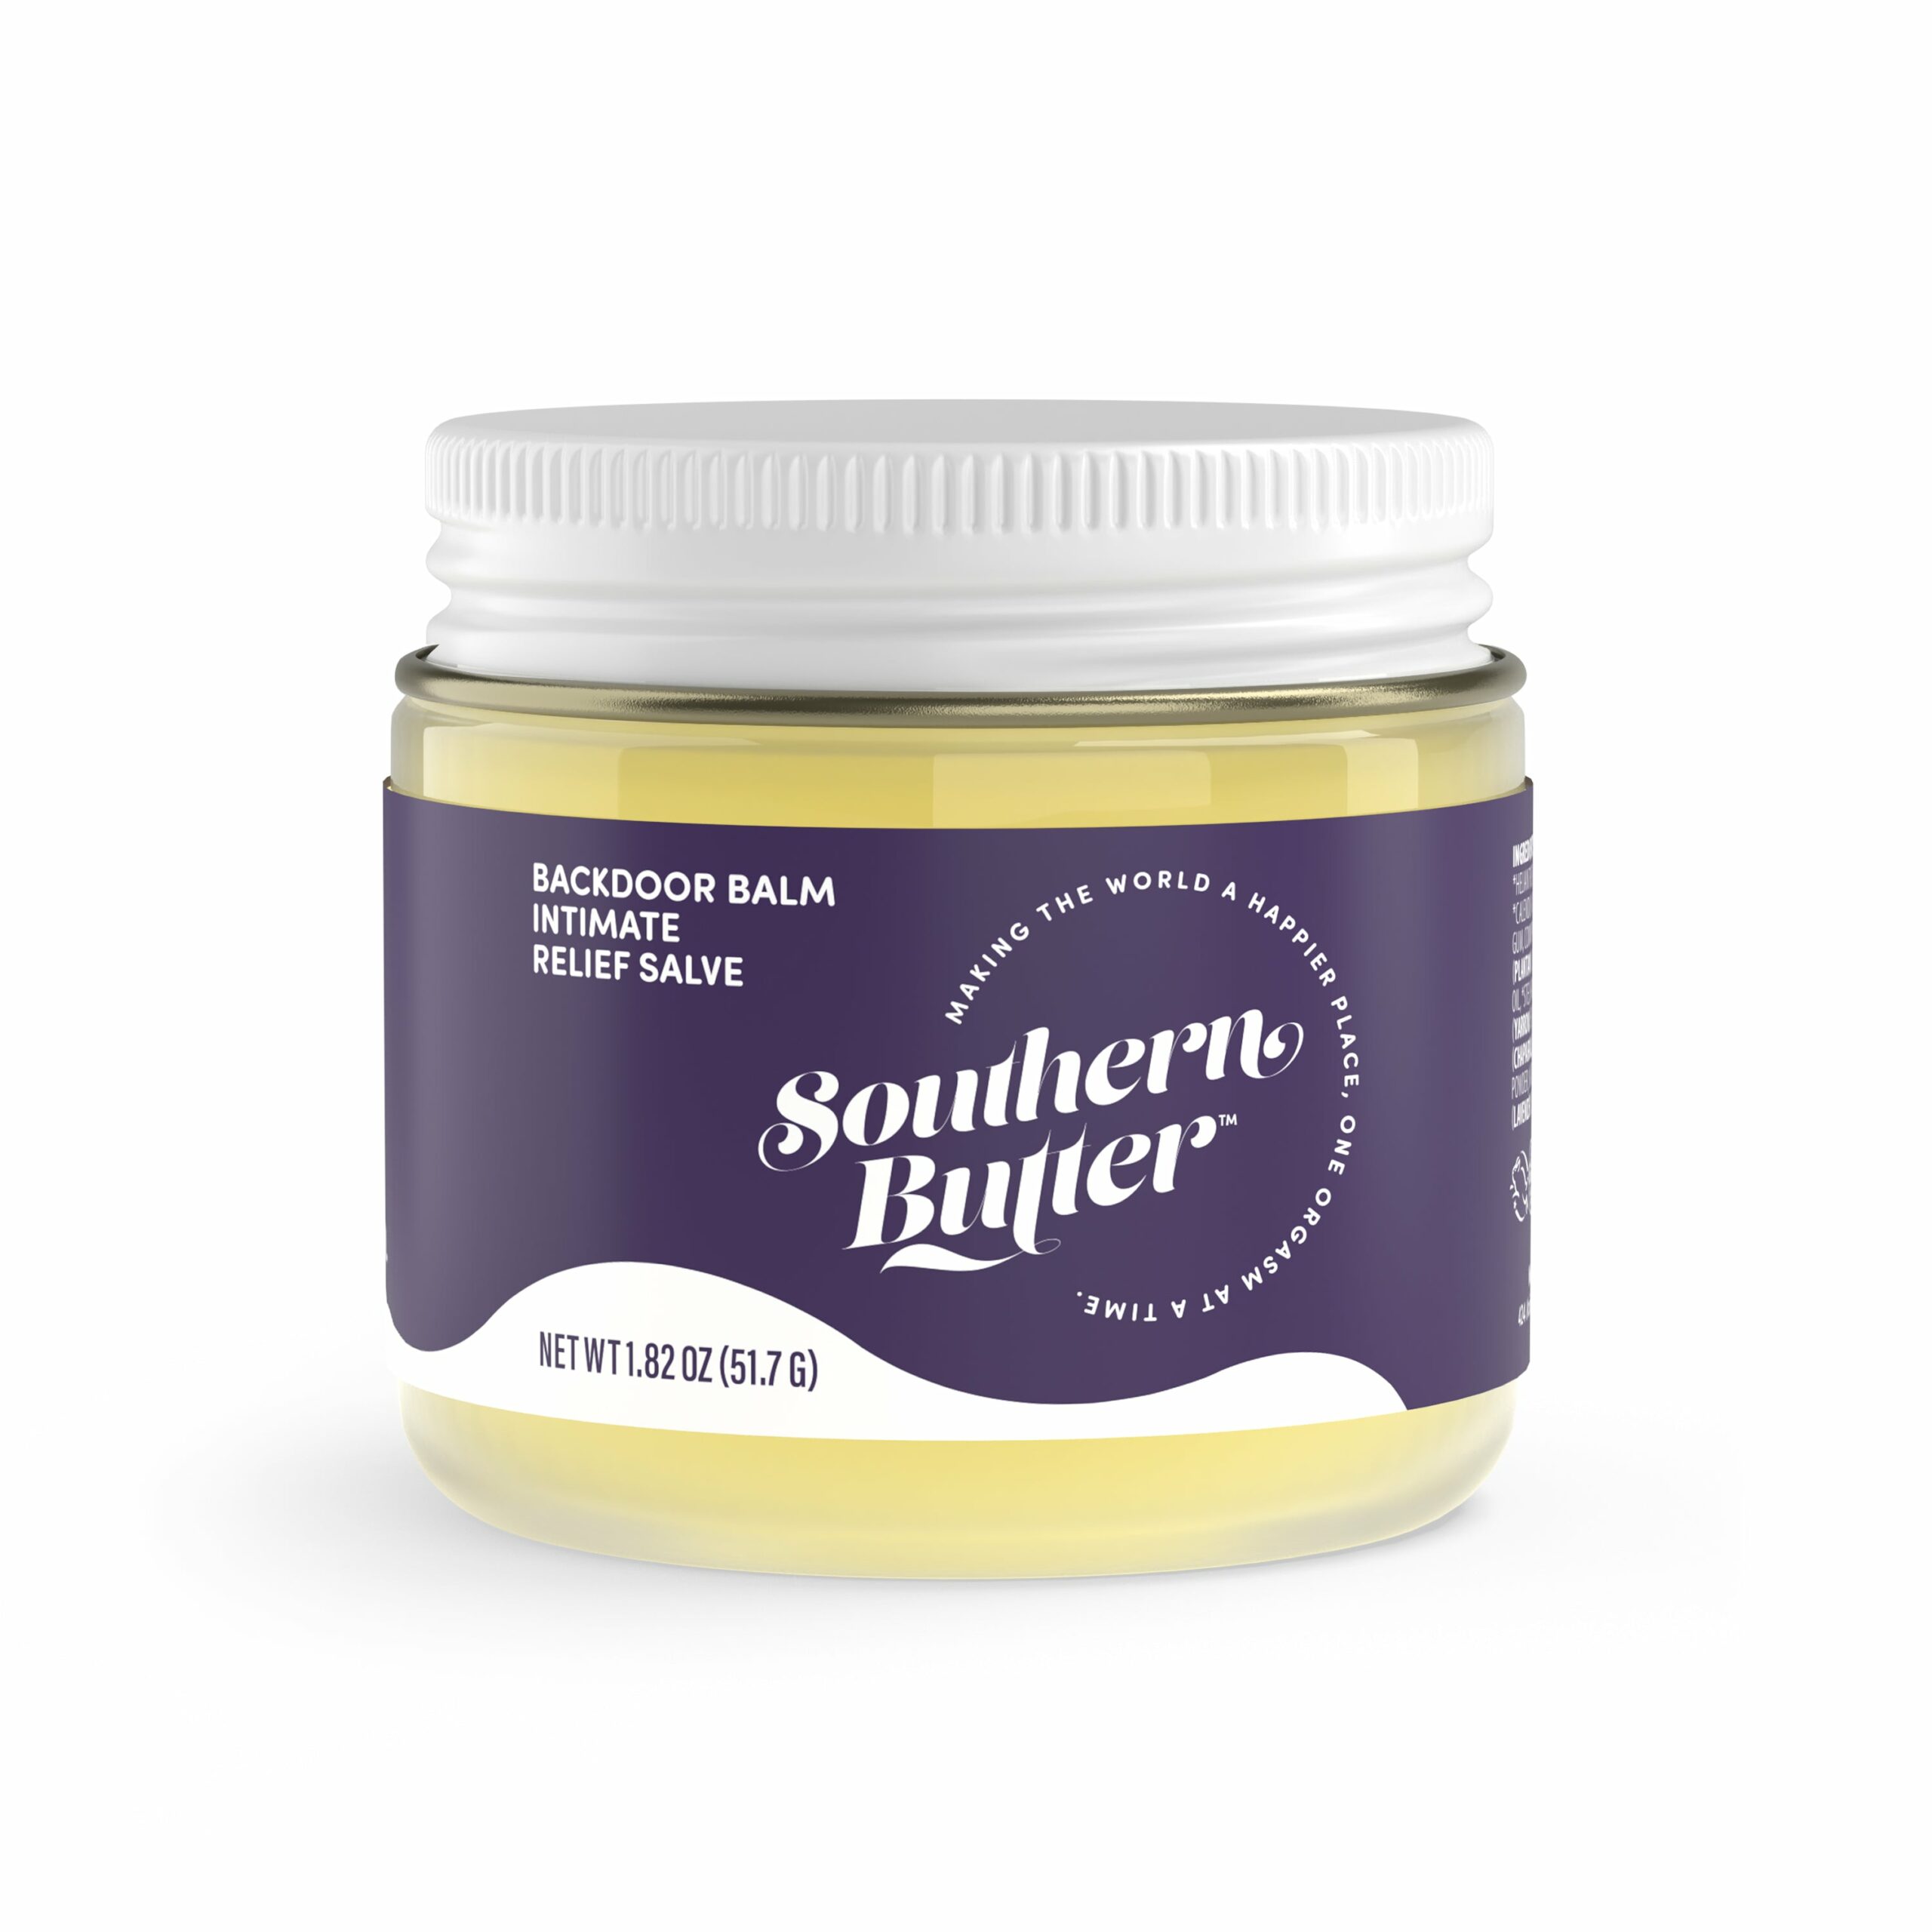 Backdoor Balm Intimate Relief Salve by Southern Butter